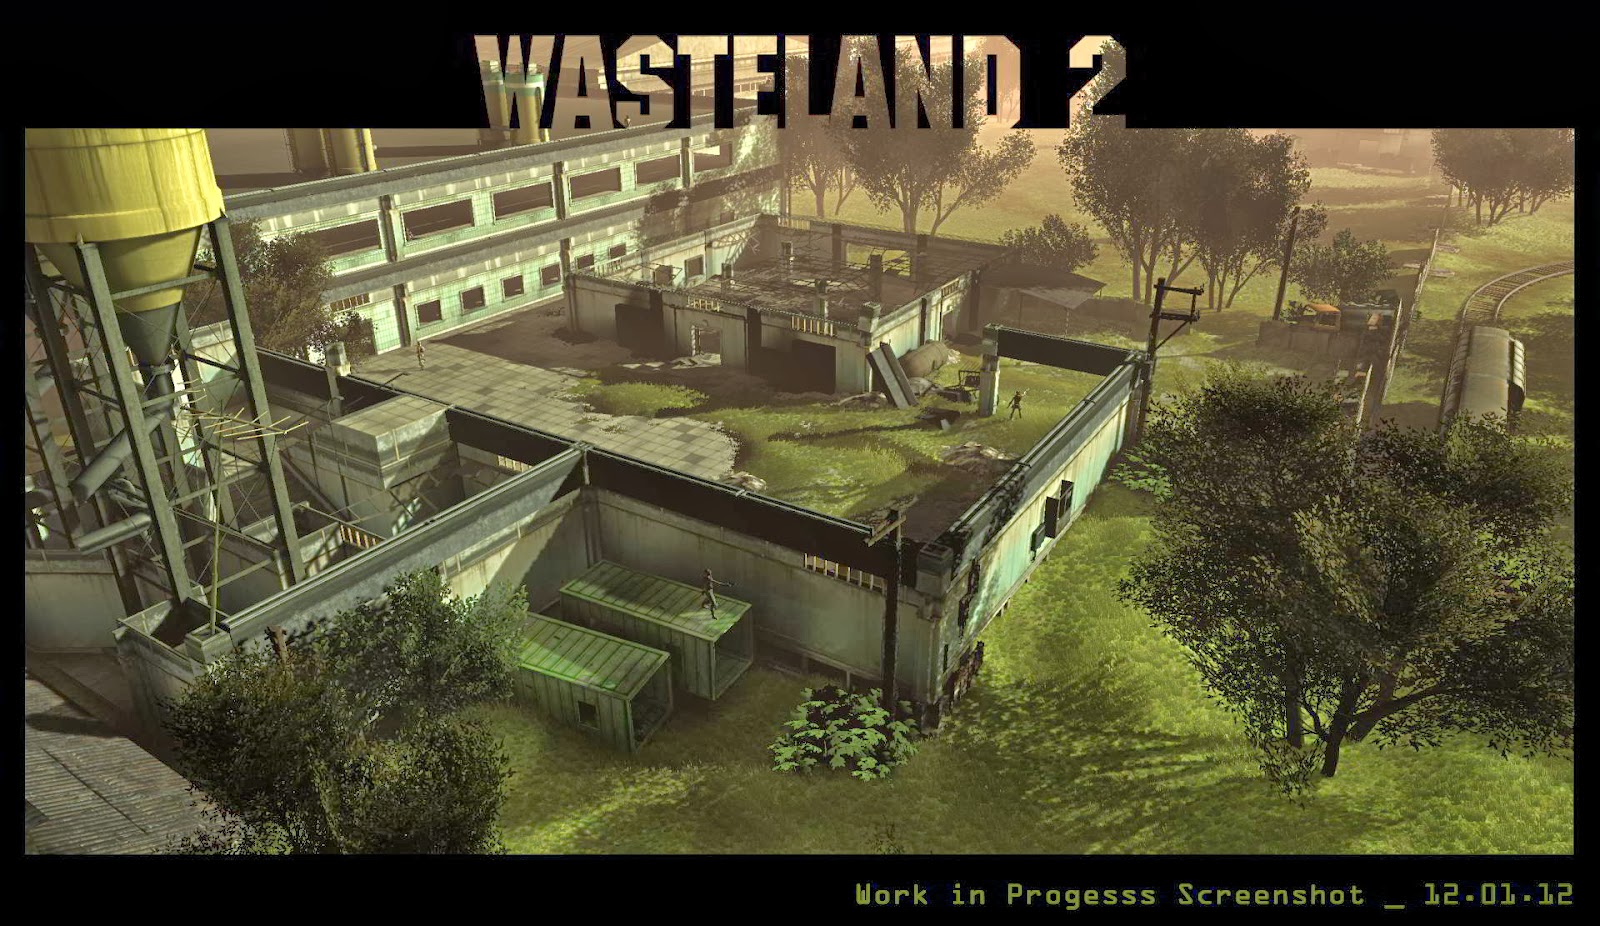 download wasteland 2 switch for free